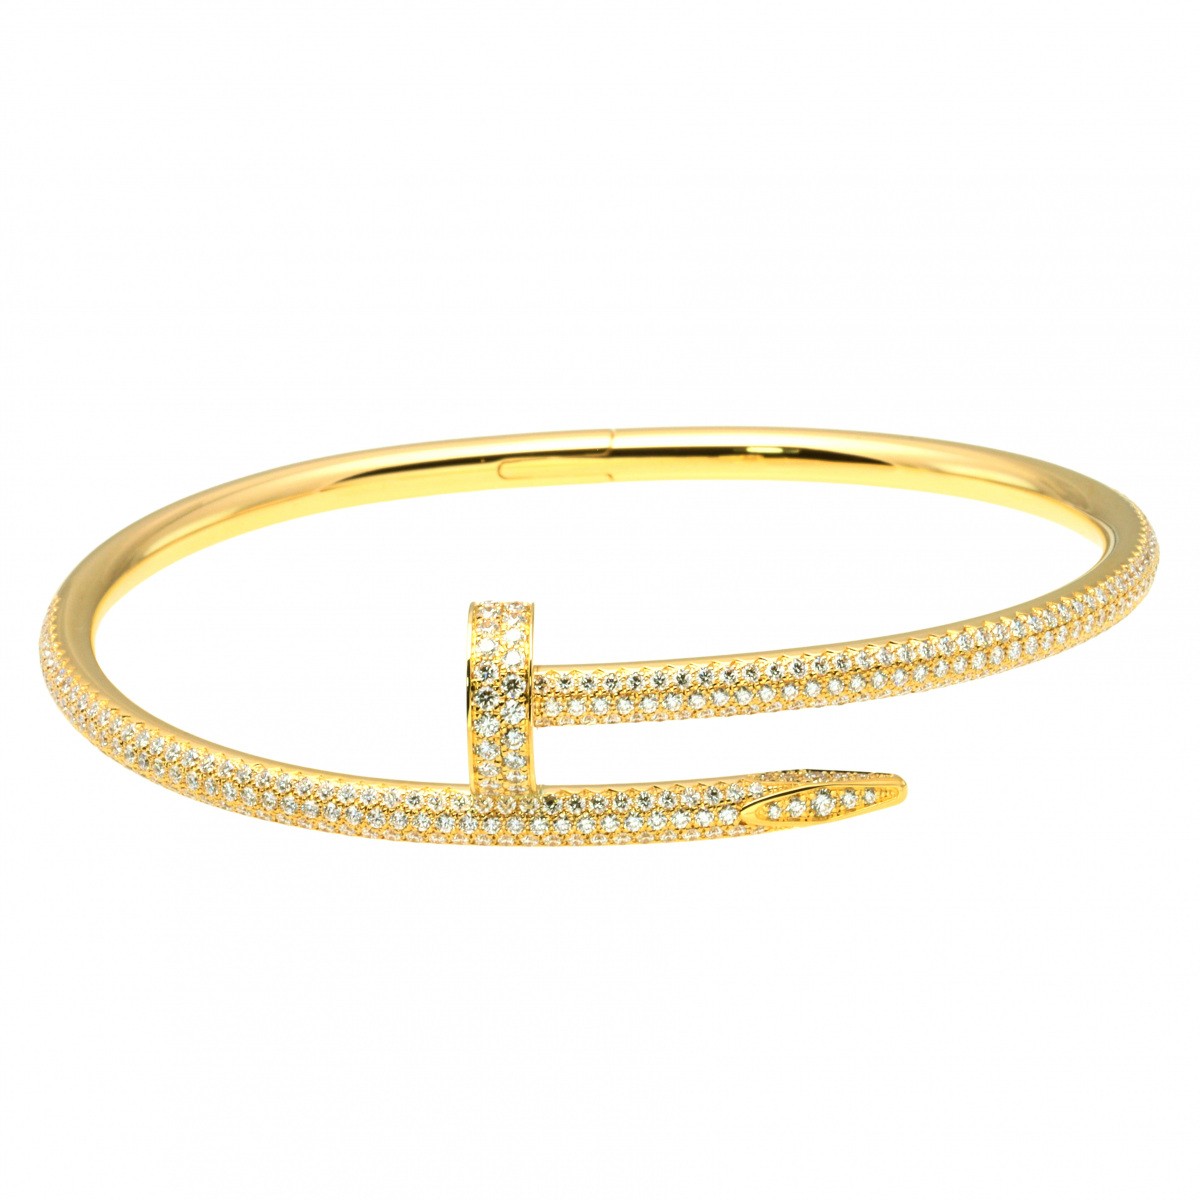 Cartier Just Uncle K18YG yellow gold bracelet pre-owned